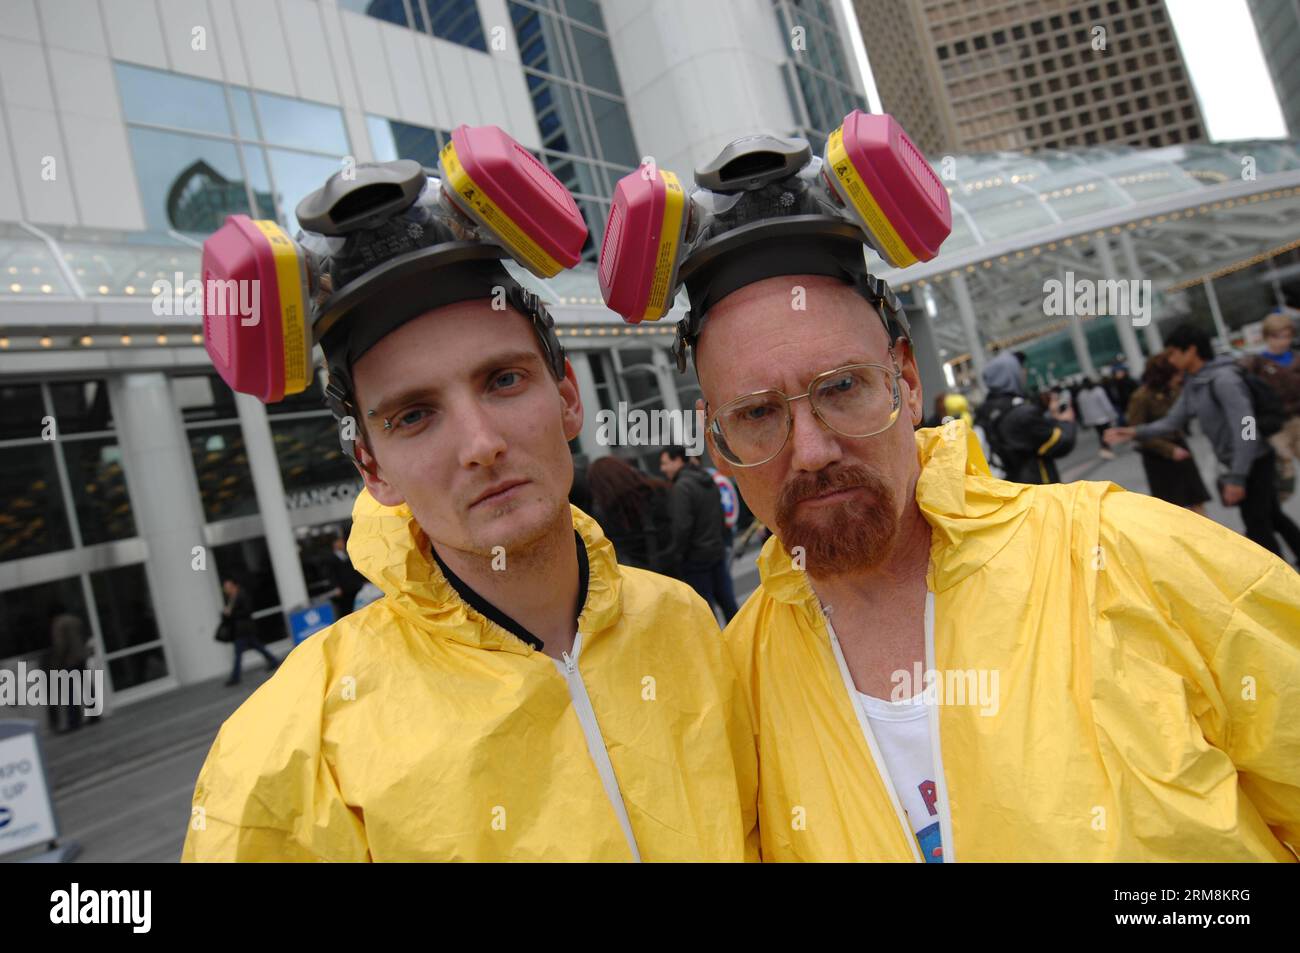 People dressed as their favorite characters pose during the Fan Expo 2014 in Vancouver, Canada, April 18, 2014. Fan Expo is an annual multi-genre fan convention, showcasing comic books, science fiction/fantasy and film/television and related popular arts. This convention is one of the largest of its kind in the world. (Xinhua/Sergei Bachlakov) CANADA-VANCOUVER-FAN EXPO 2014 PUBLICATIONxNOTxINxCHN   Celebrities Dressed As their Favorite characters Pose during The supporter EXPO 2014 in Vancouver Canada April 18 2014 supporter EXPO IS to Annual Multi Genre supporter Convention showcasing Comic B Stock Photo